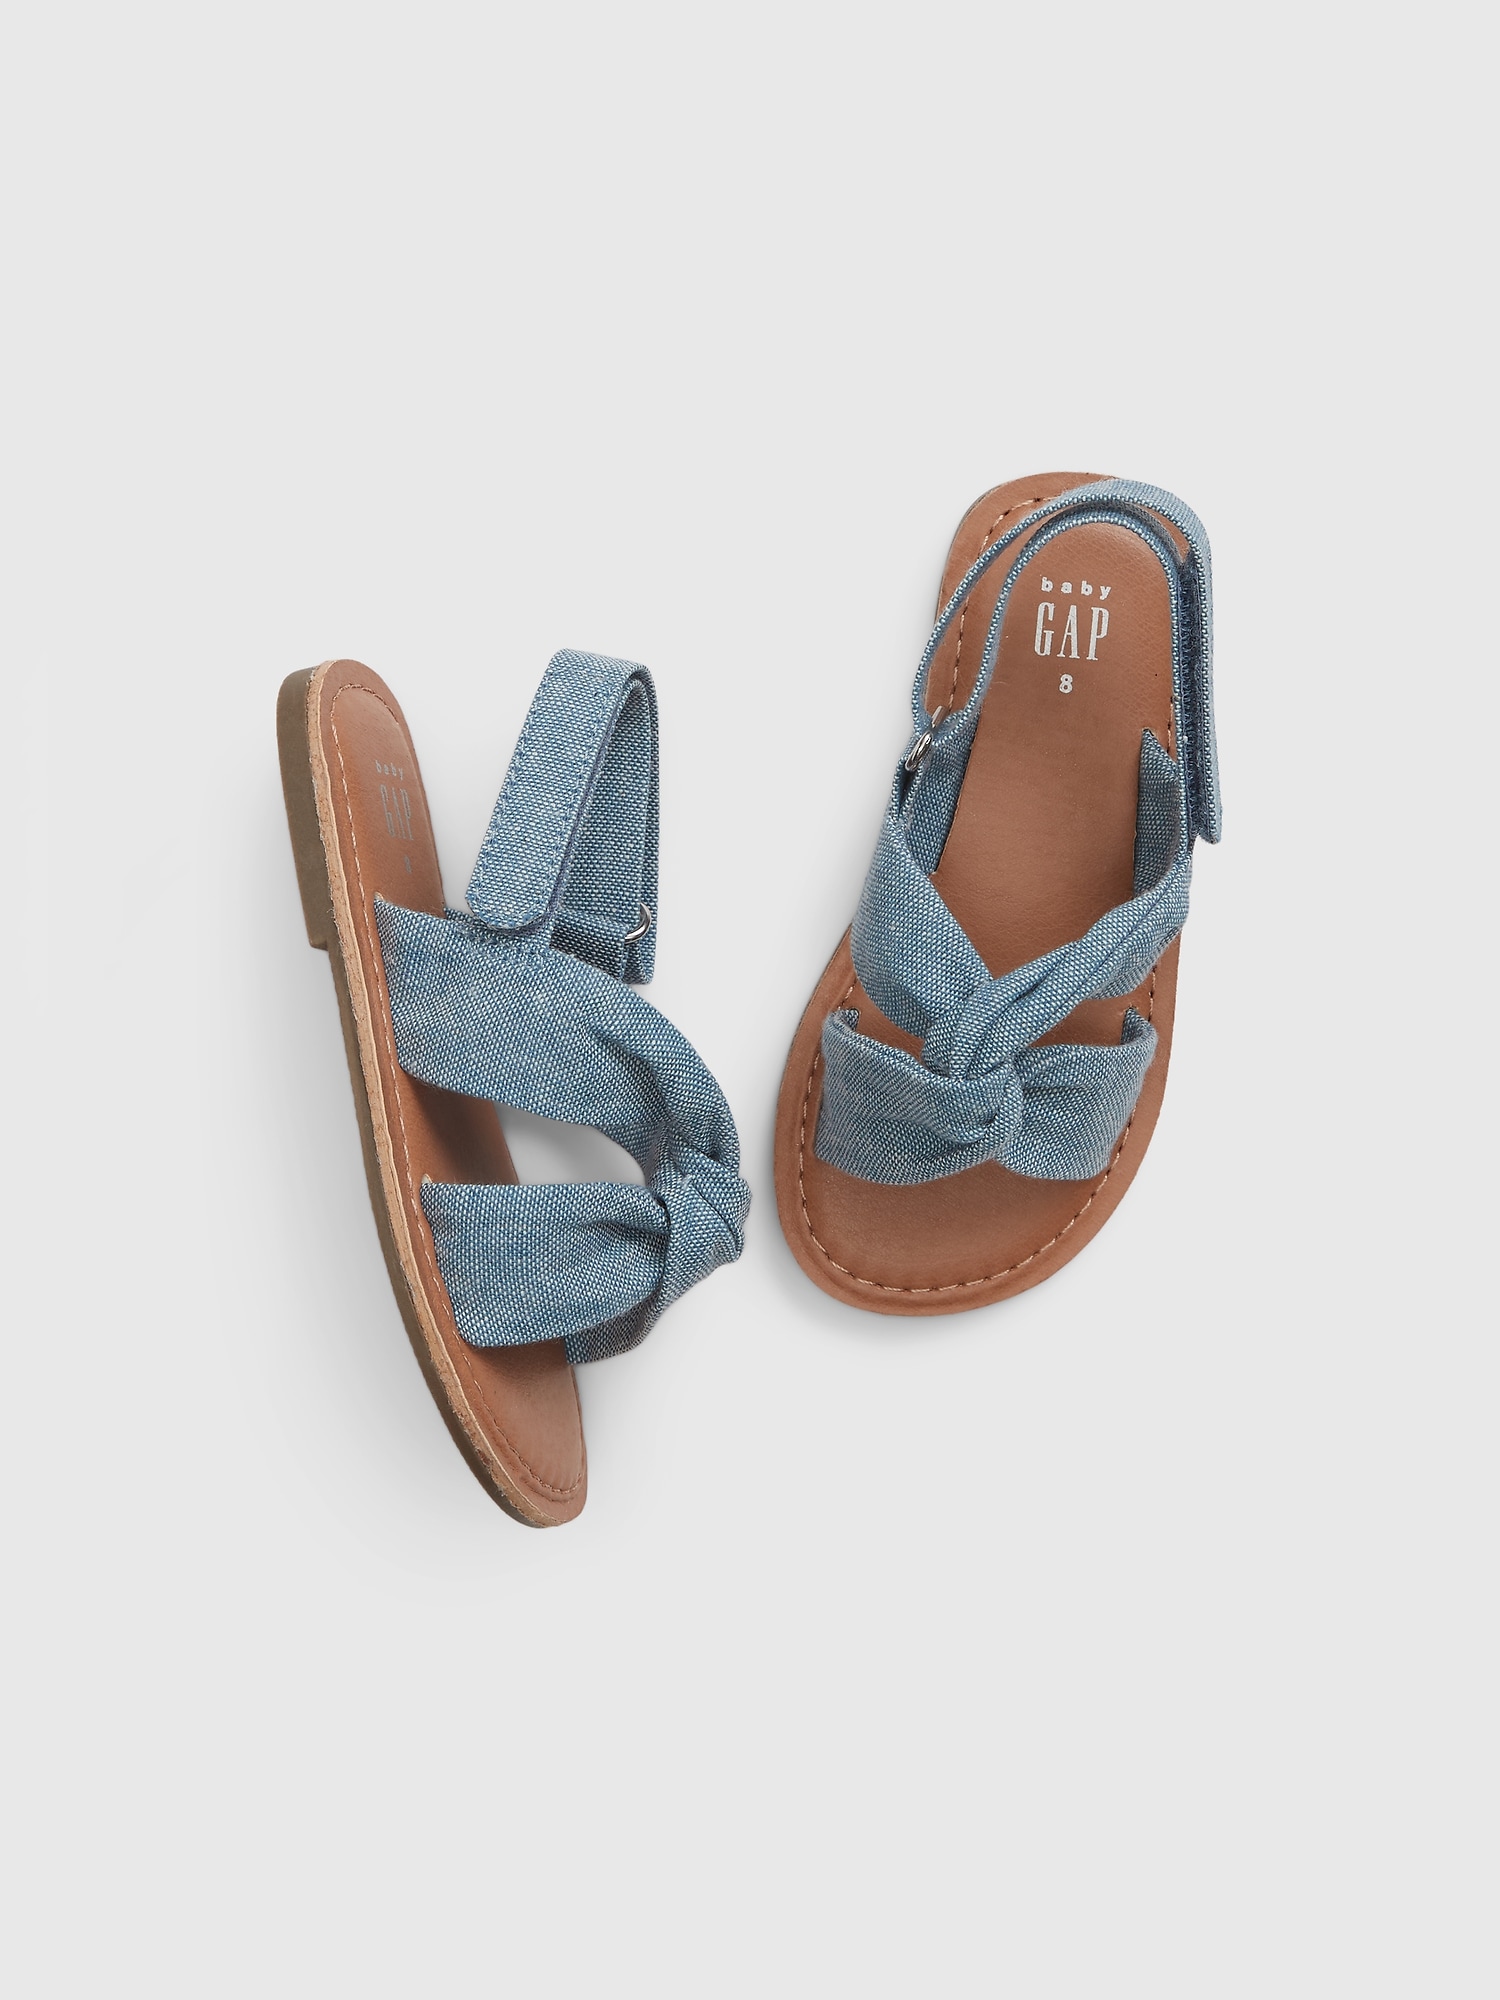 Gap Toddler Chambray Knot Sandals blue. 1